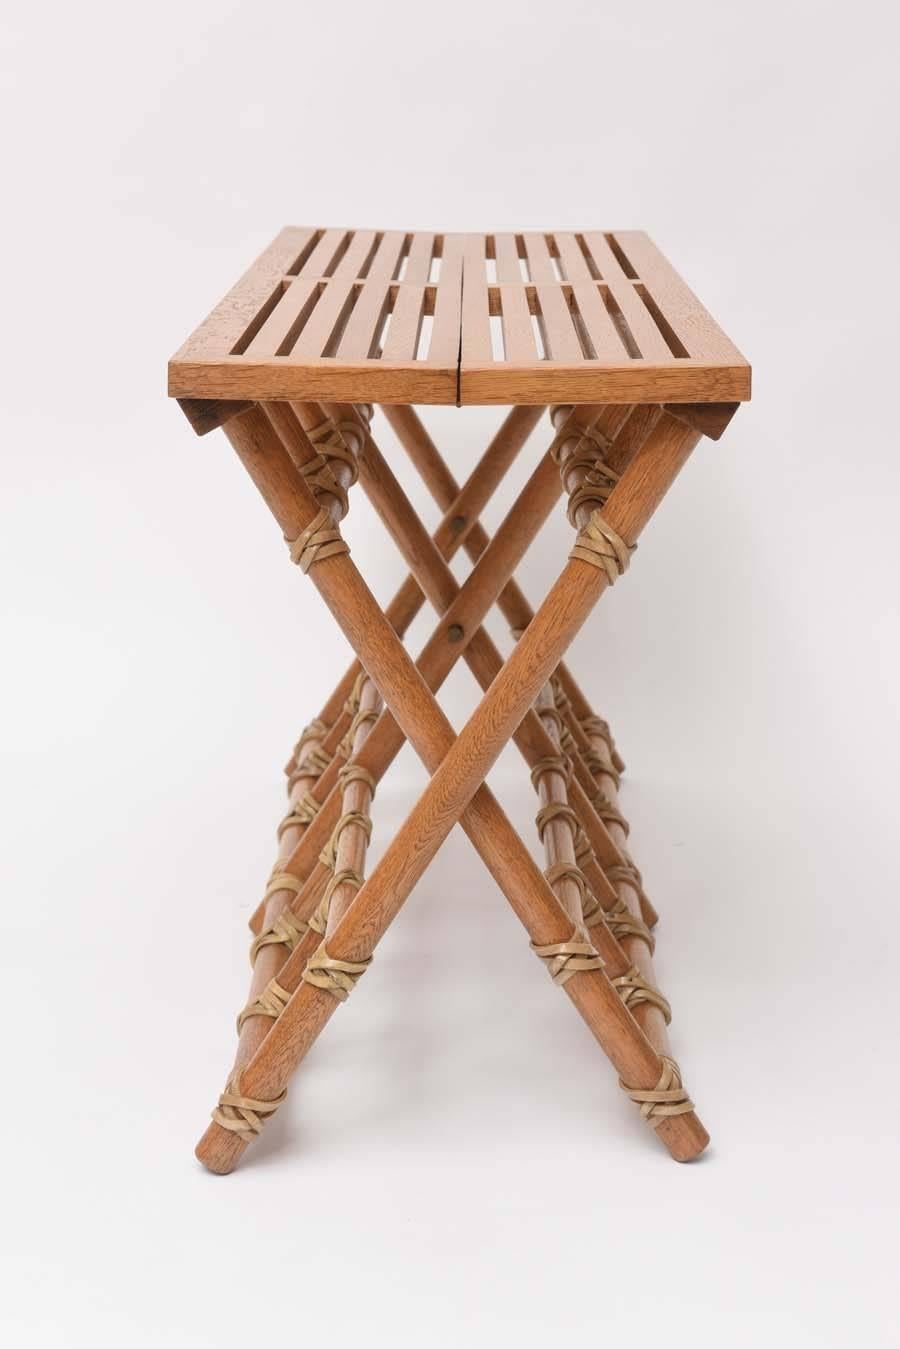 American McGuire Oak, Bamboo and Rawhide Collapsible Table or Bench